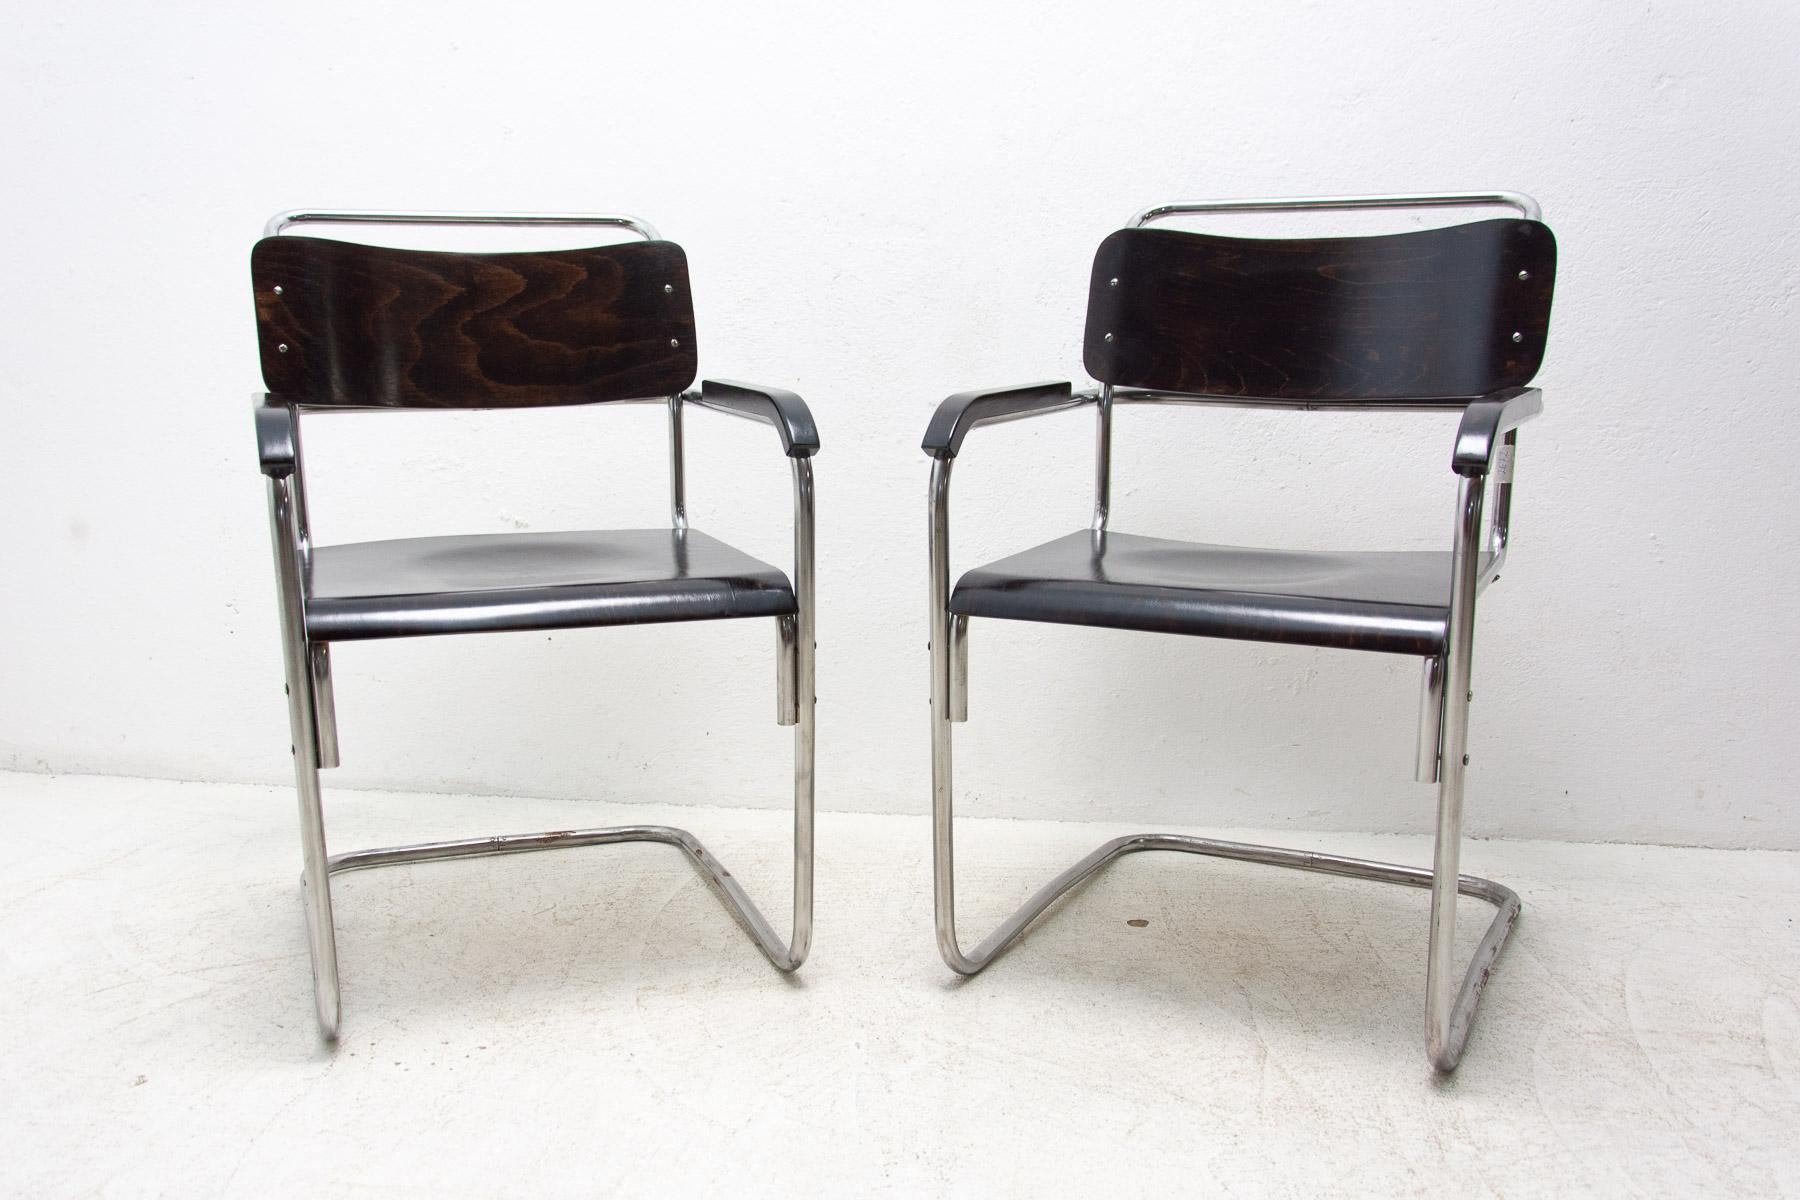 These cantilever office chairs were made in the former Czechoslovakia in the 1930s.
The production of these chairs was provided by Robert Slezák company for the world-renowned Bata company.
In the 1930s, Tomáš Bata’s company entered into a